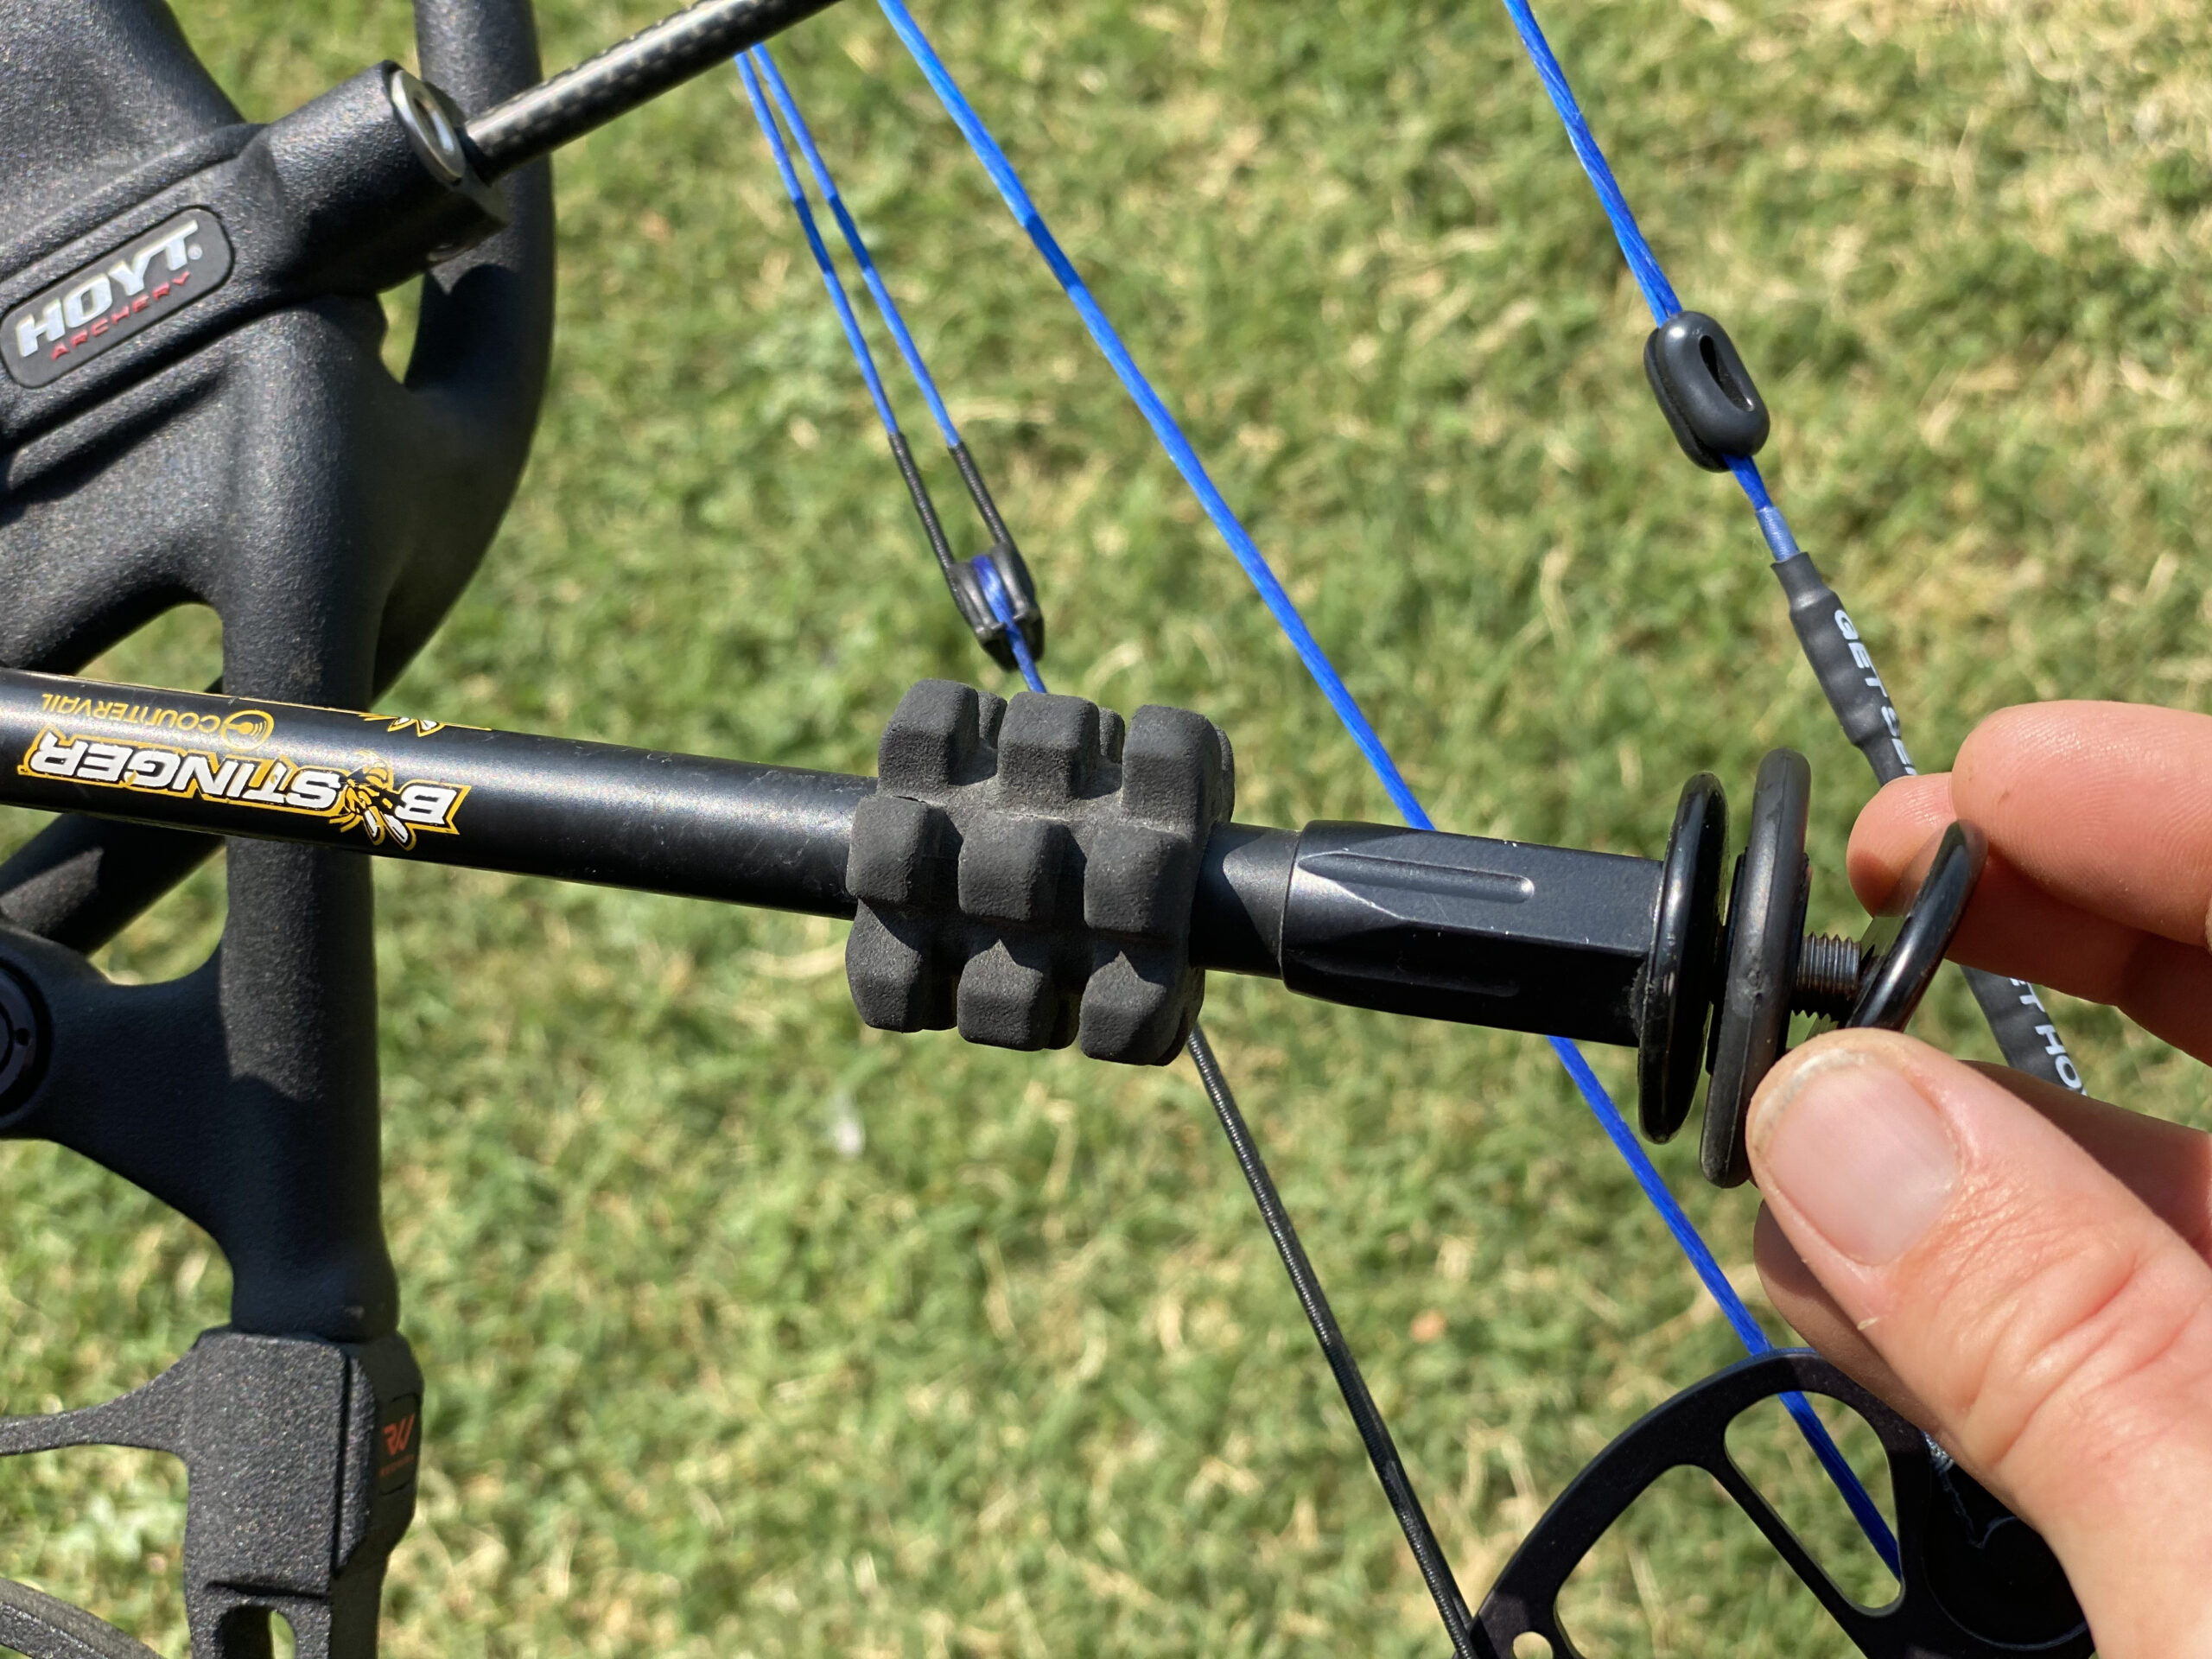 Stabilizers come with weights so you can find the best balance for your bow.